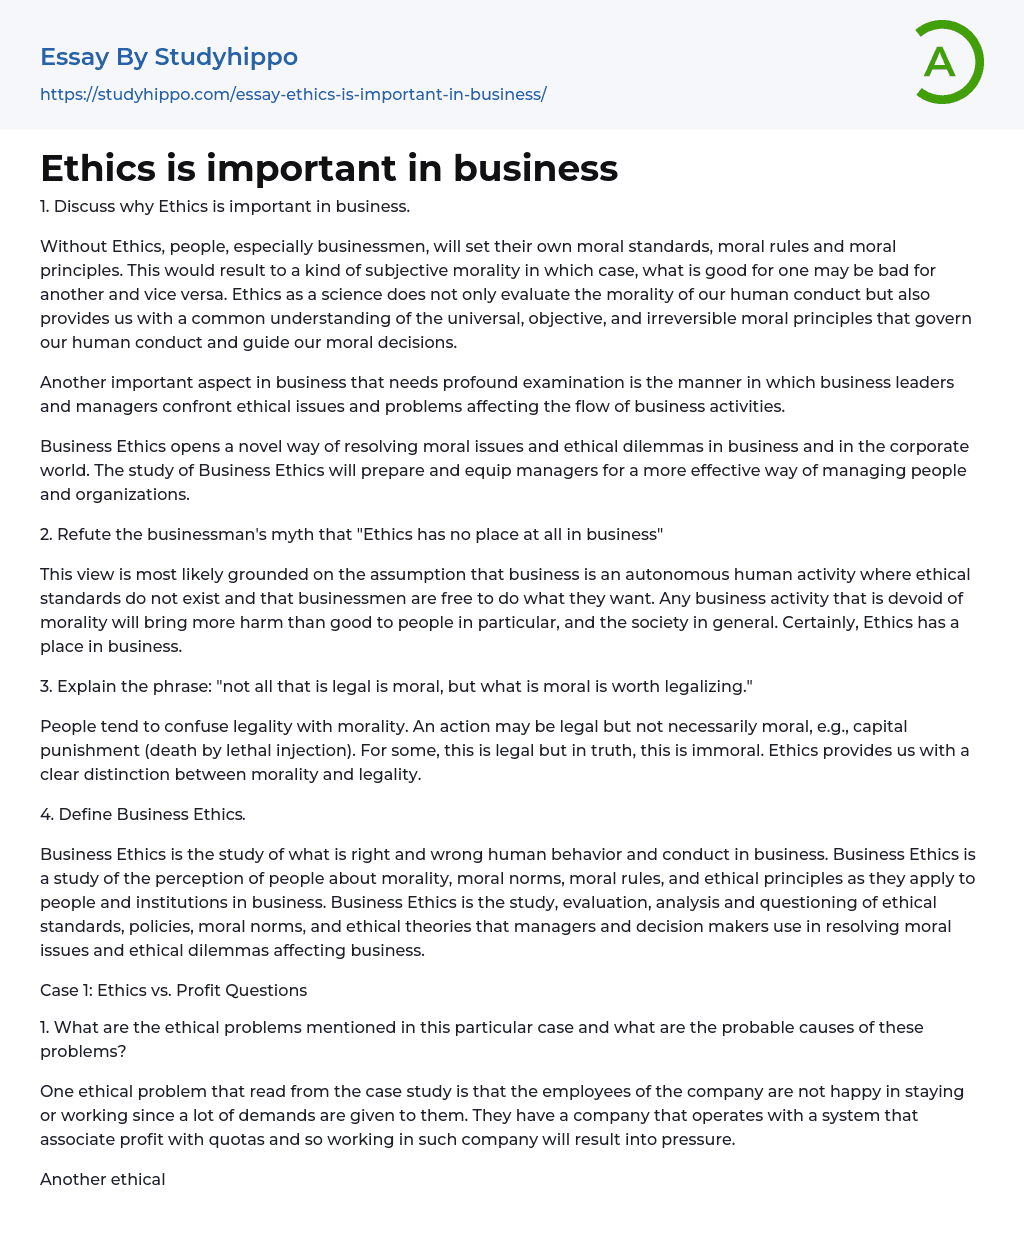 Ethics is important in business Essay Example